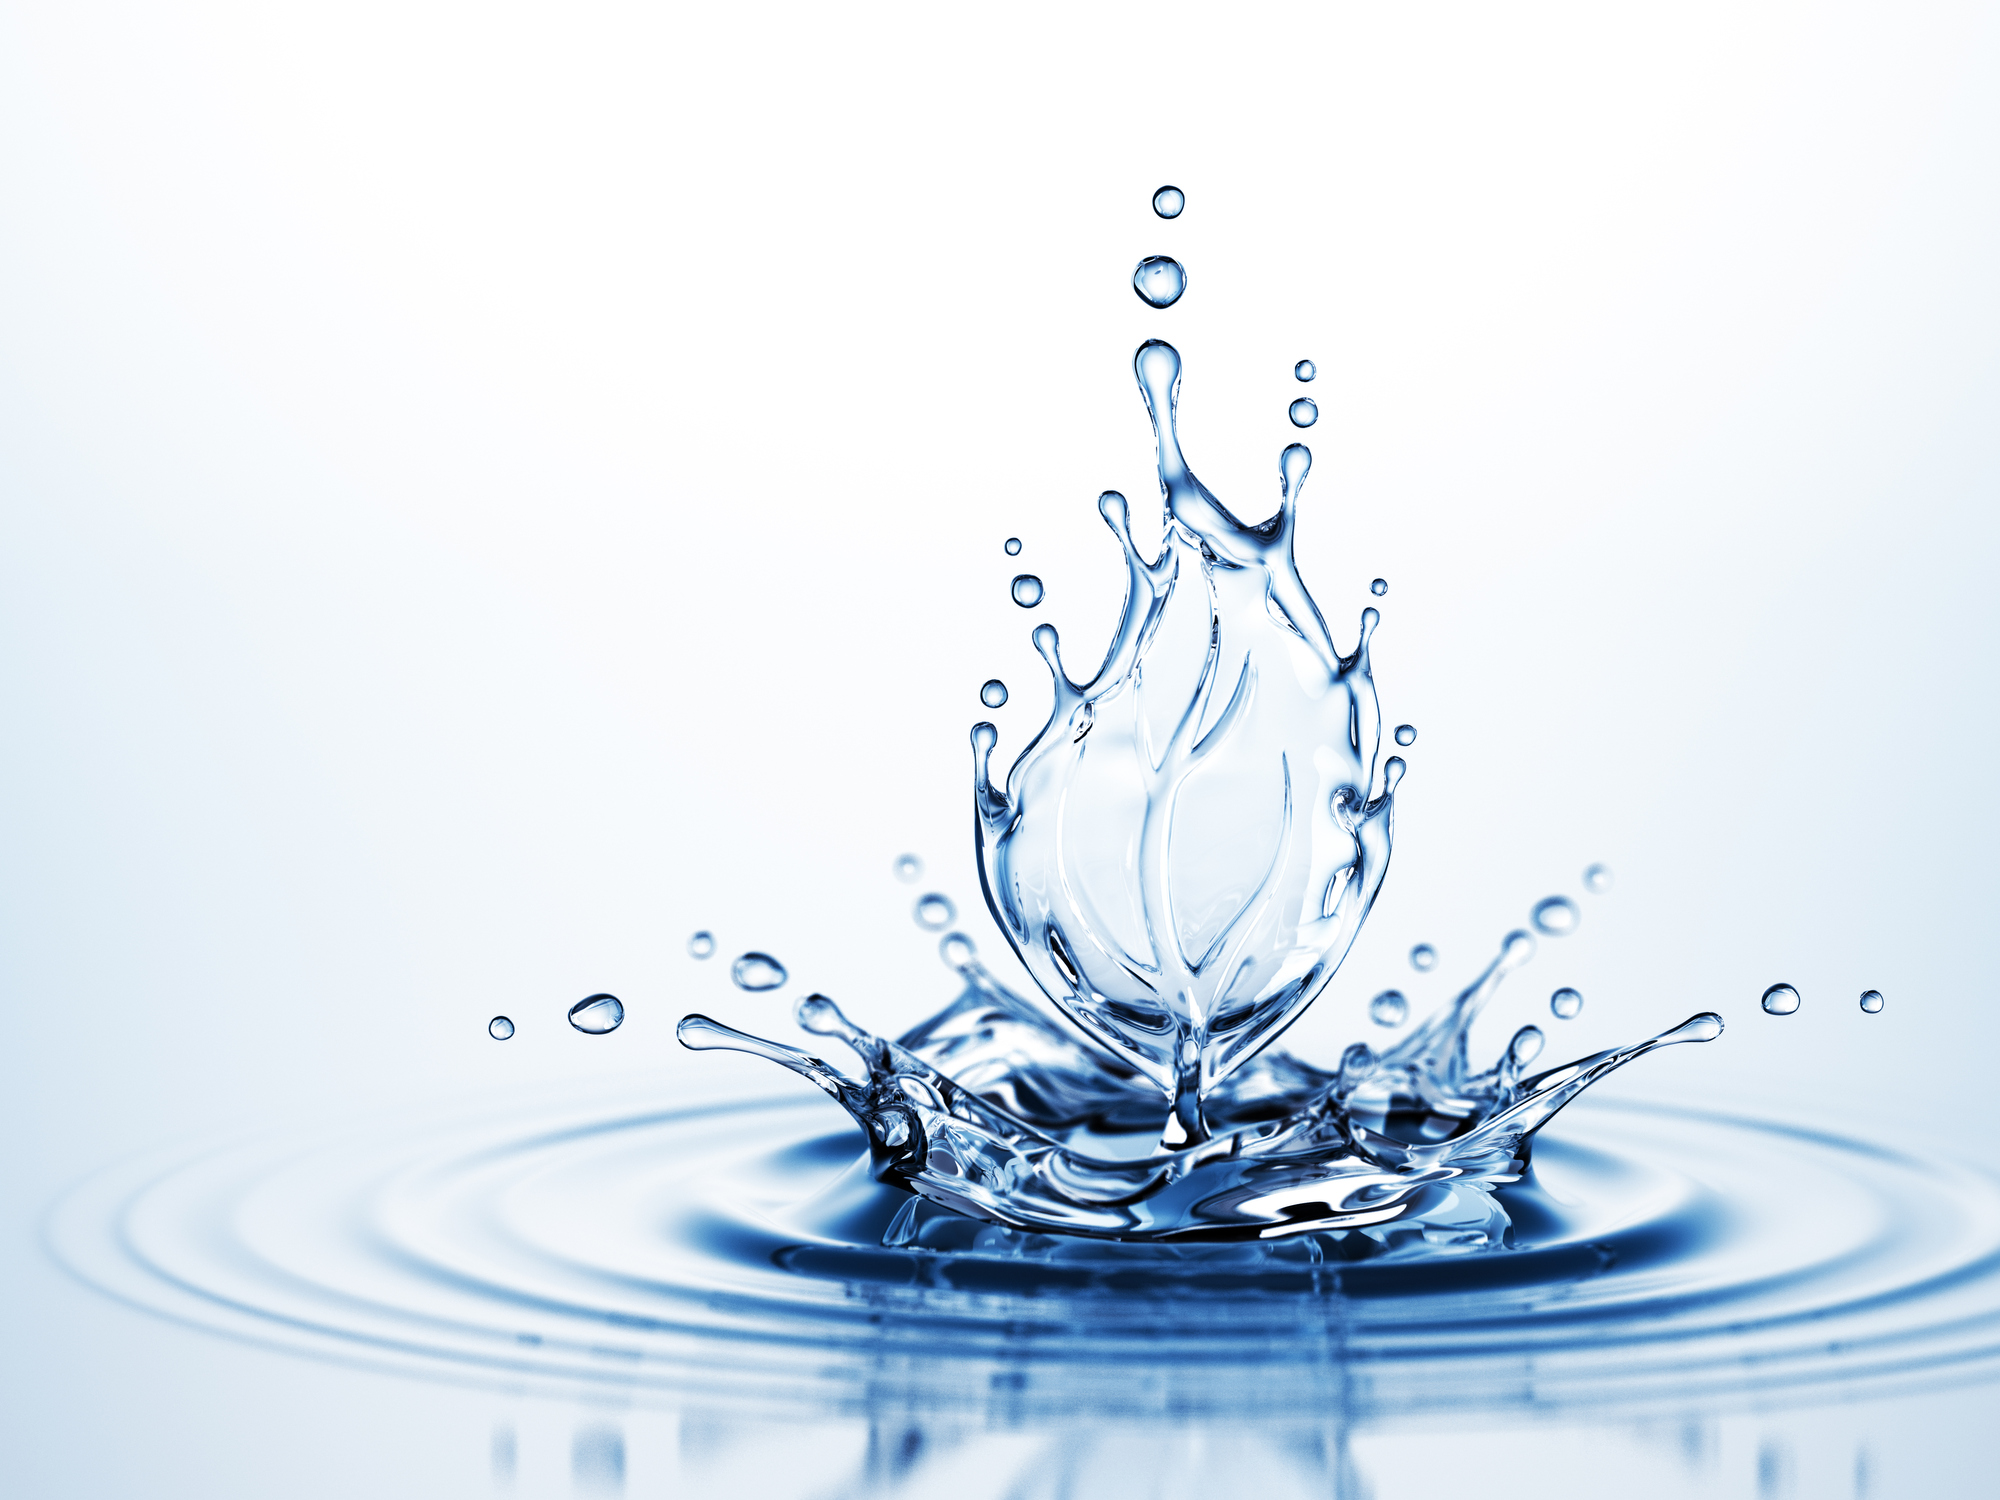 Buying Whole House Water Filtration Systems – Is It A Smart Move?